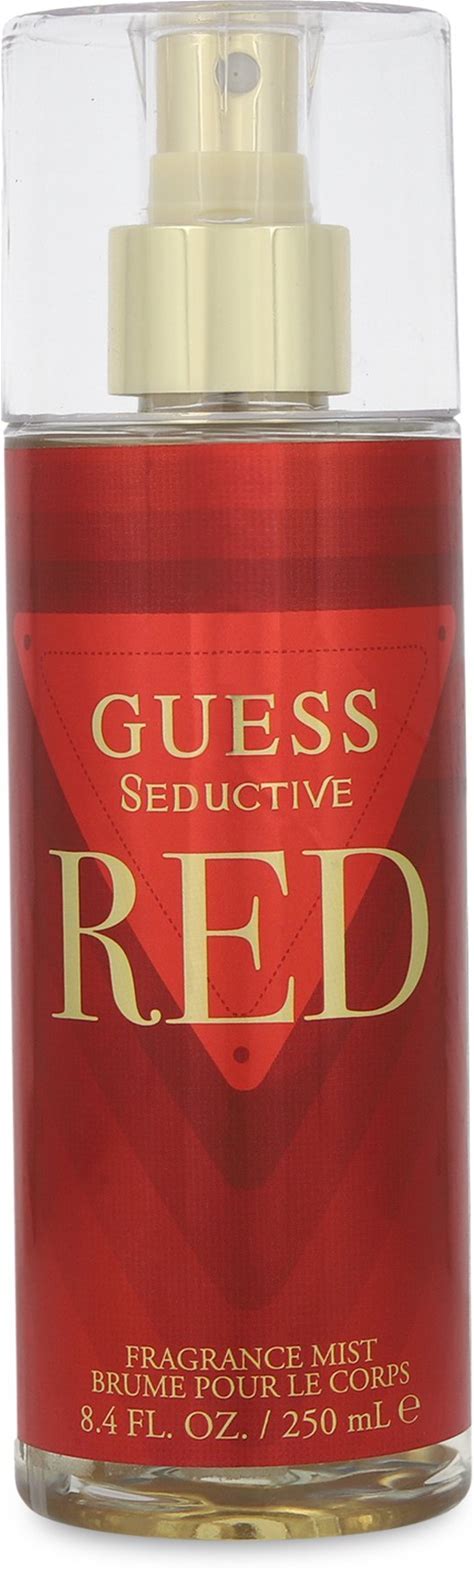 Body guess seductive red